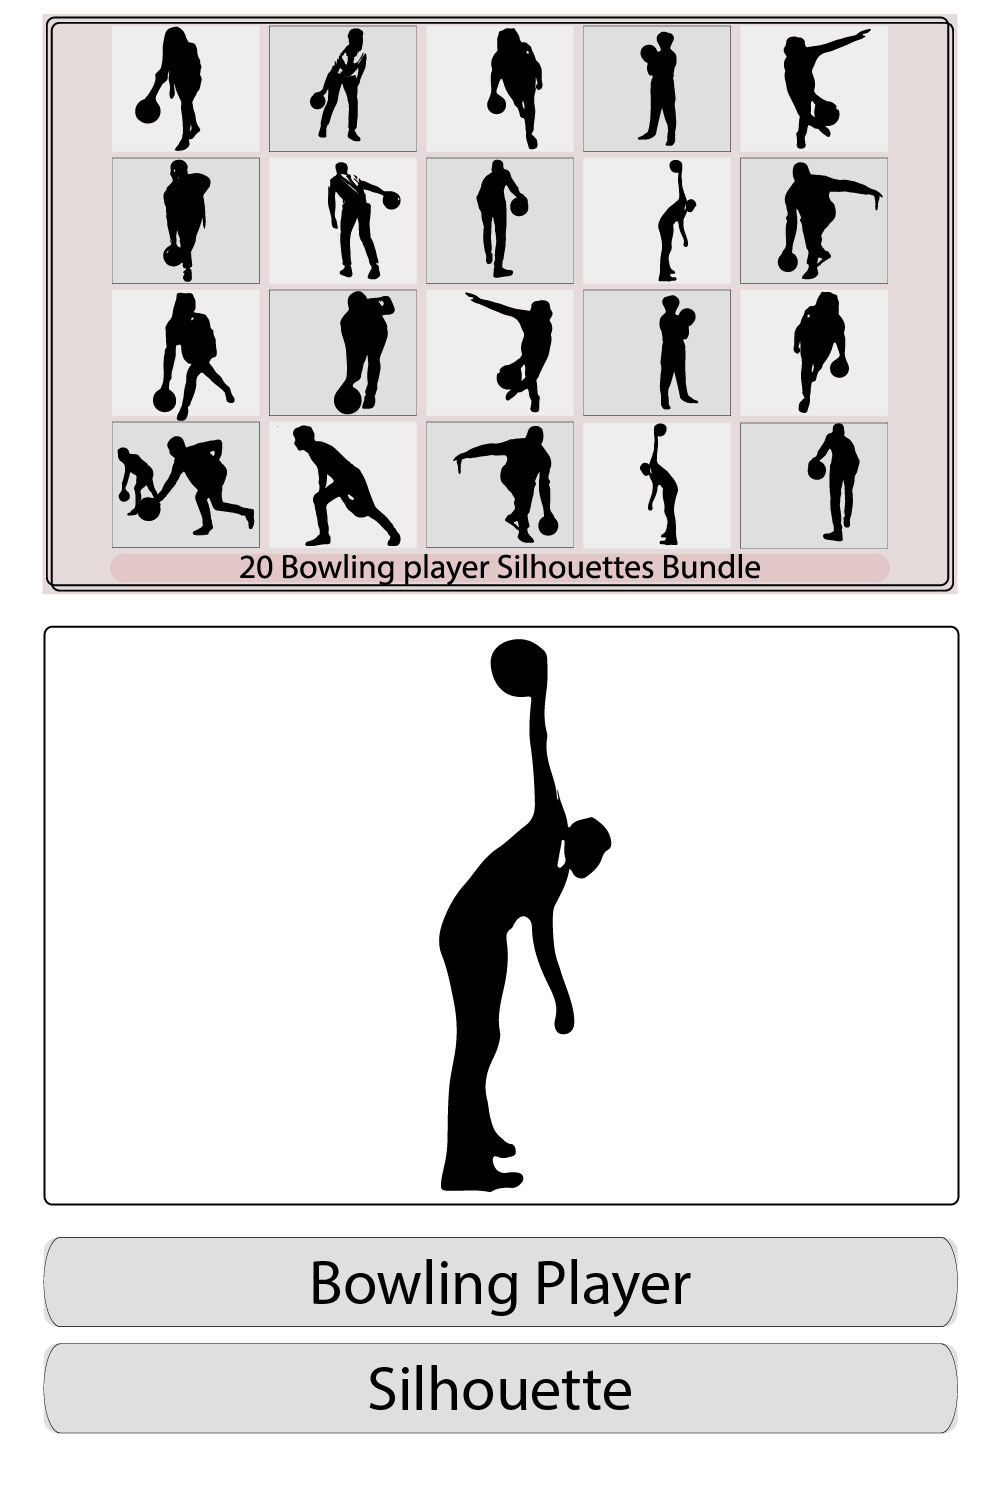 Bowling Sport Players Men and Women Pose Cartoon Graphic Vector,illustration of man playing bowling,bowling people silhouettes pinterest preview image.